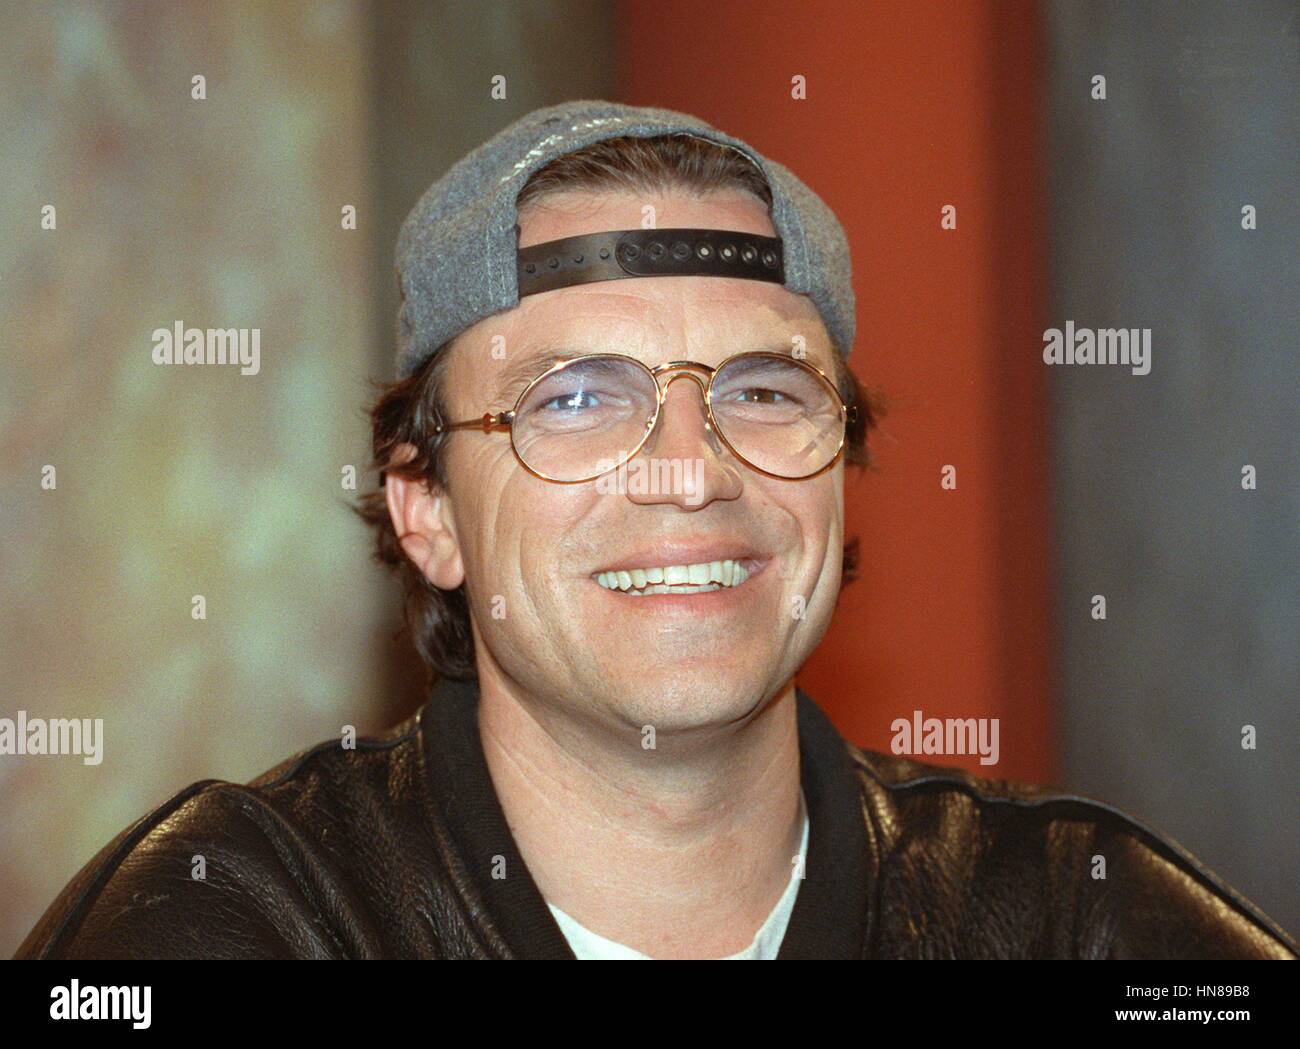 Berlin, Germany. 24th Apr, 2003. ARCHIVE - TV presenter Wolfgang Lippert smiles at a press event in Berlin, Germany, 24 April 2003. Photo: Nestor Bachmann/Zentralbild/dpa/Alamy Live News Stock Photo